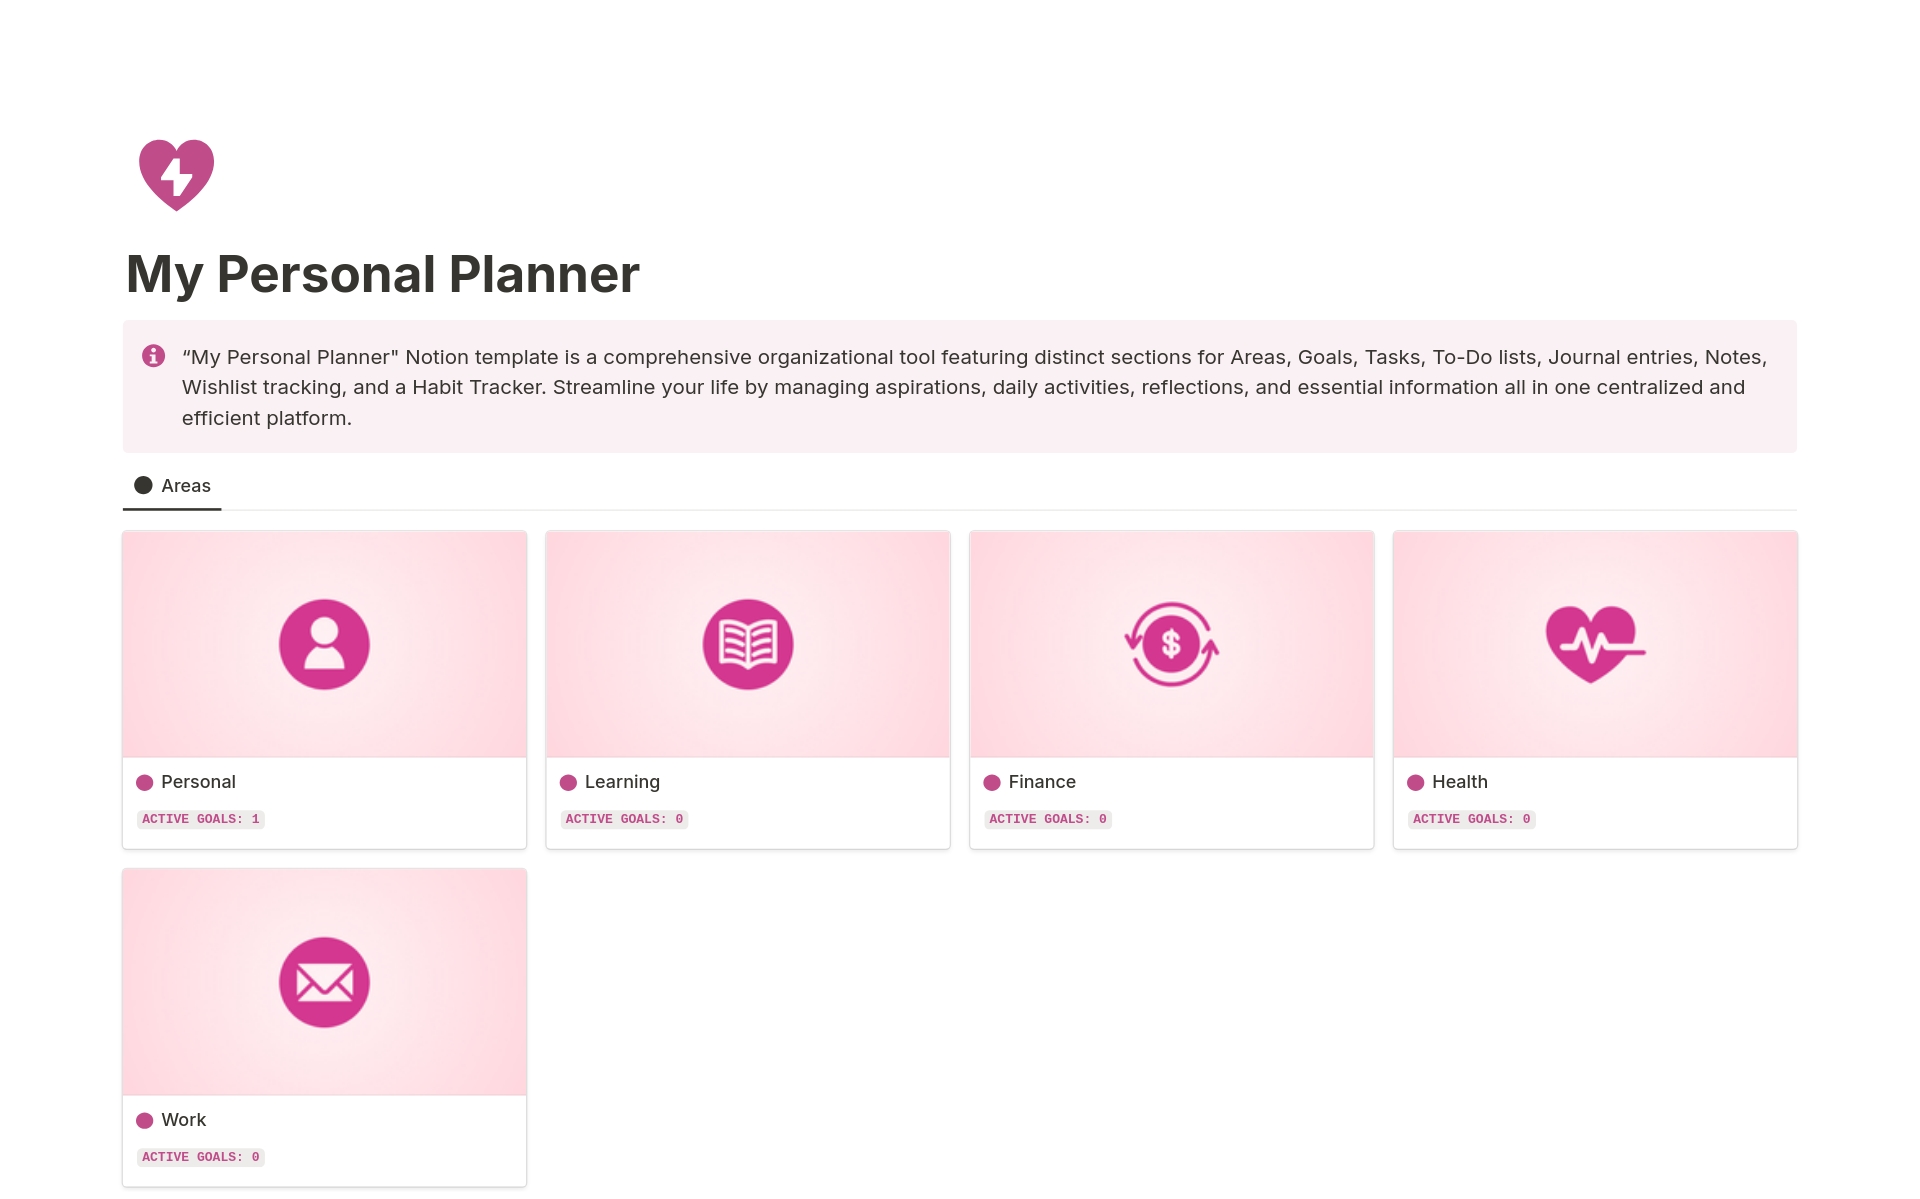 “My Personal Planner" Notion template is a comprehensive organizational tool featuring distinct sections for Areas, Goals, Tasks, To-Do lists, Journal entries, Notes, Wishlist tracking, and a Habit Tracker. 